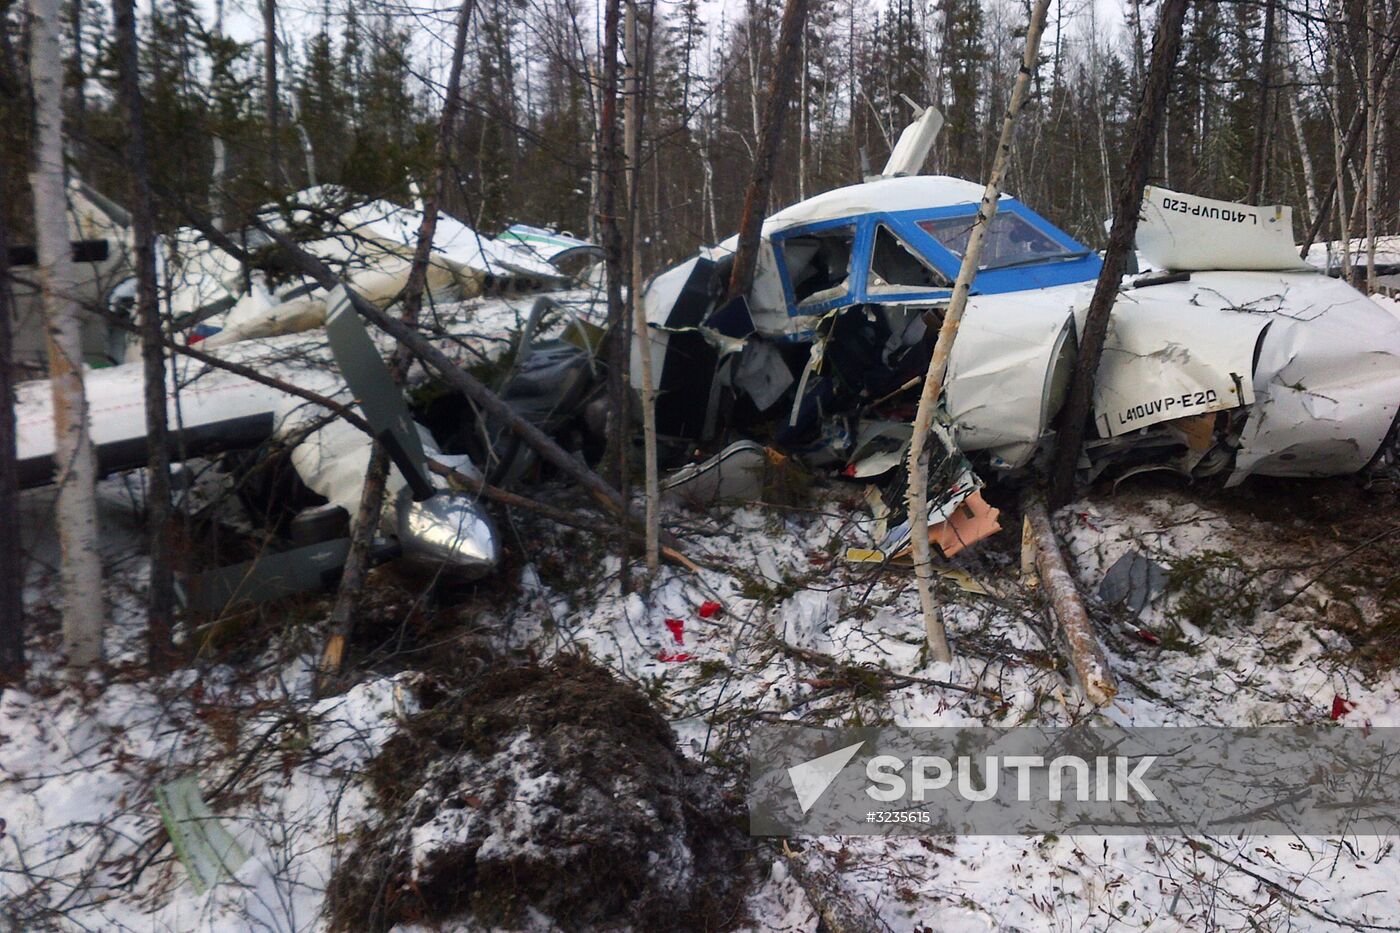 L-410 aircraft crashes in Khabarovsk Territory